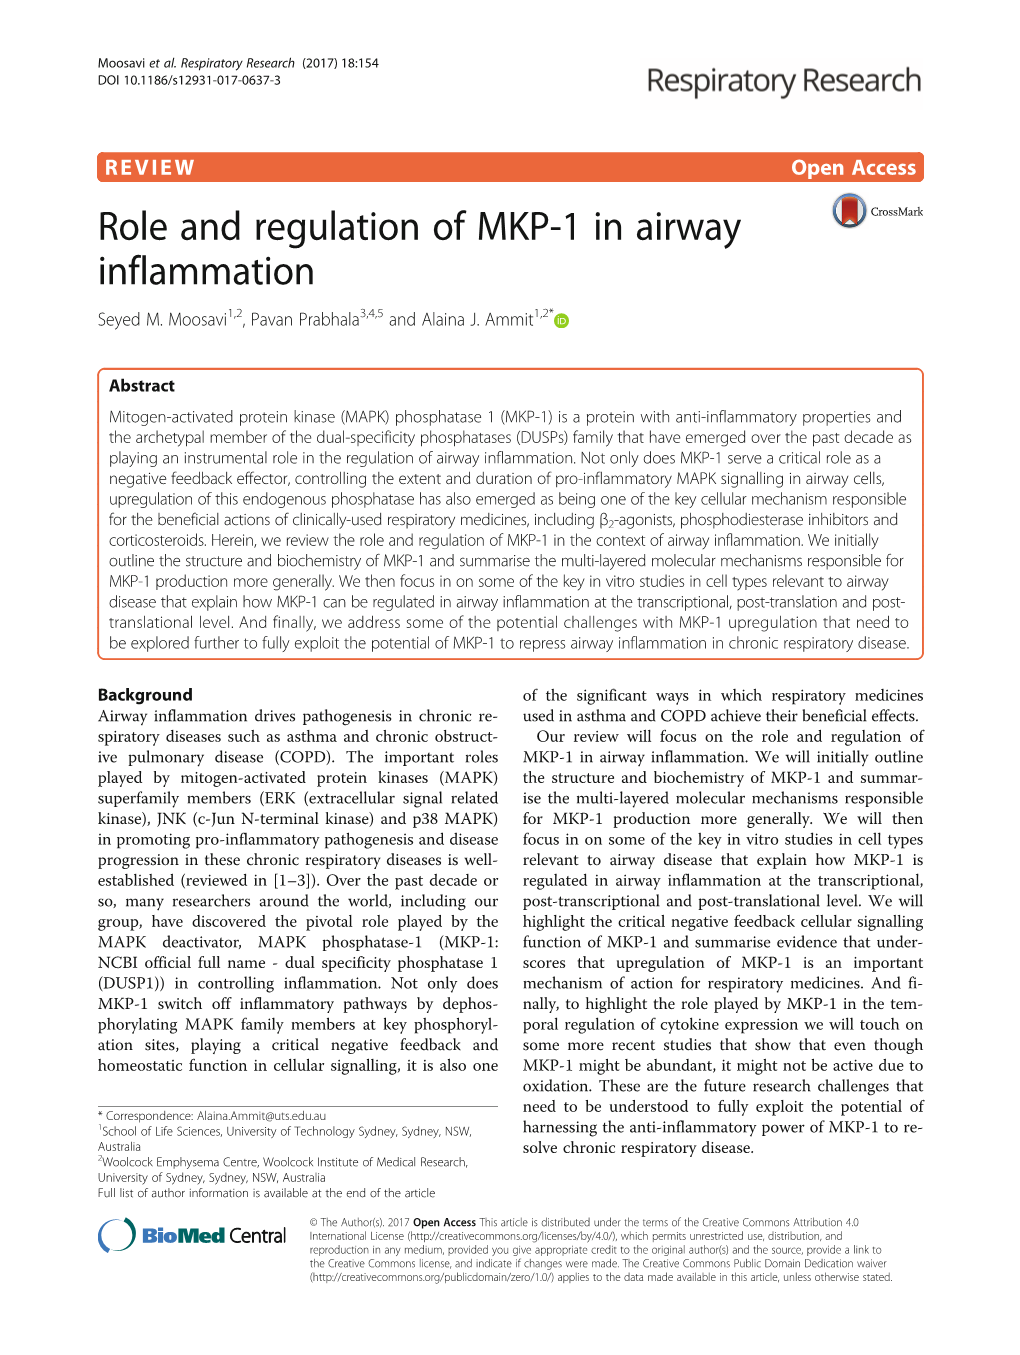 Role and Regulation of MKP-1 in Airway Inflammation Seyed M